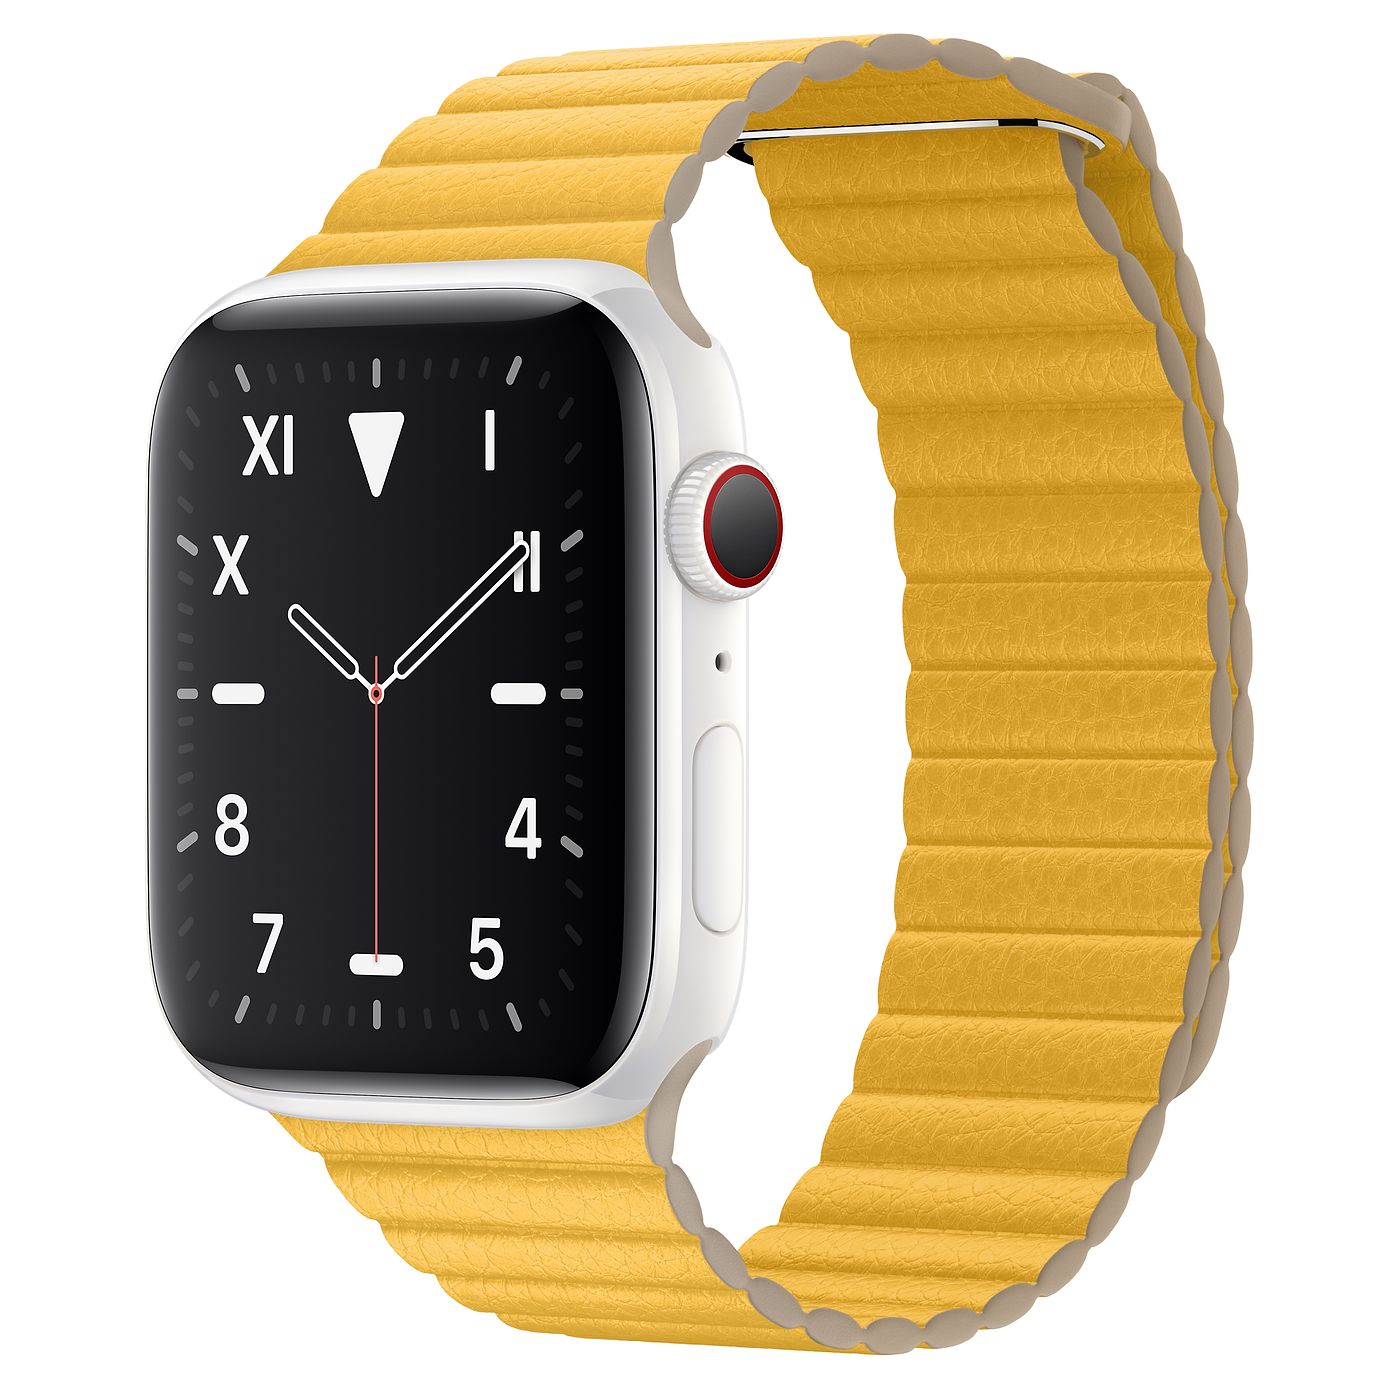 Sell Apple Watch 5 40mm Series For the Best Value - Trade My Apple